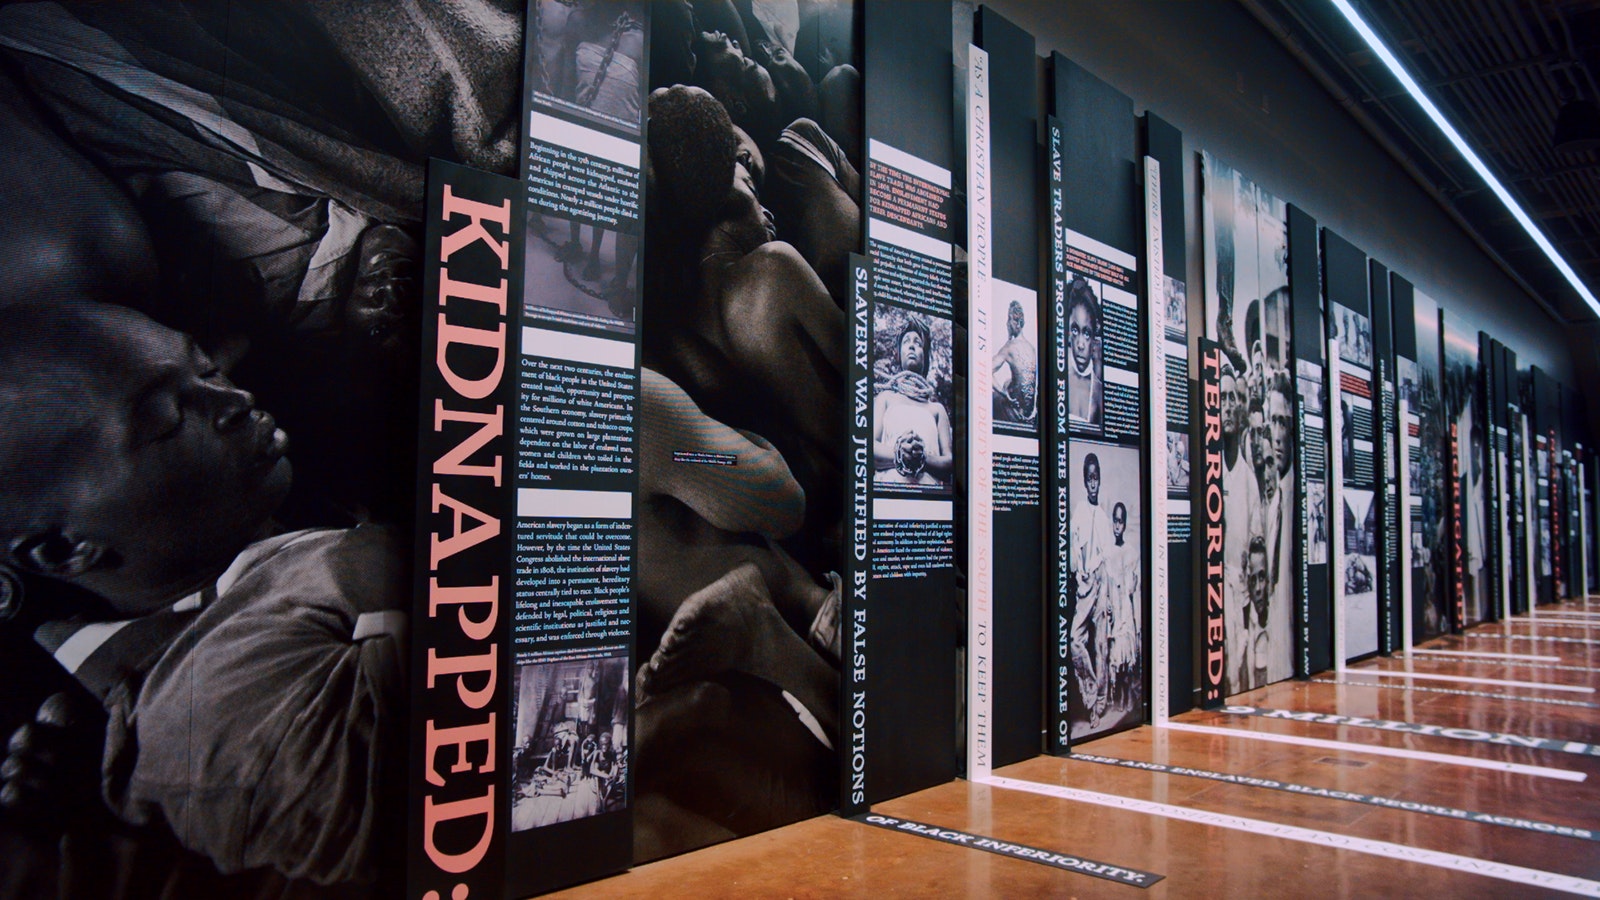 A graphic timeline of the evolution of slavery and racism in the United States, including text and images, lines a wall of the Legacy Museum in Montgomery, Alabama © Equal Justice Initiative / Human Pictures